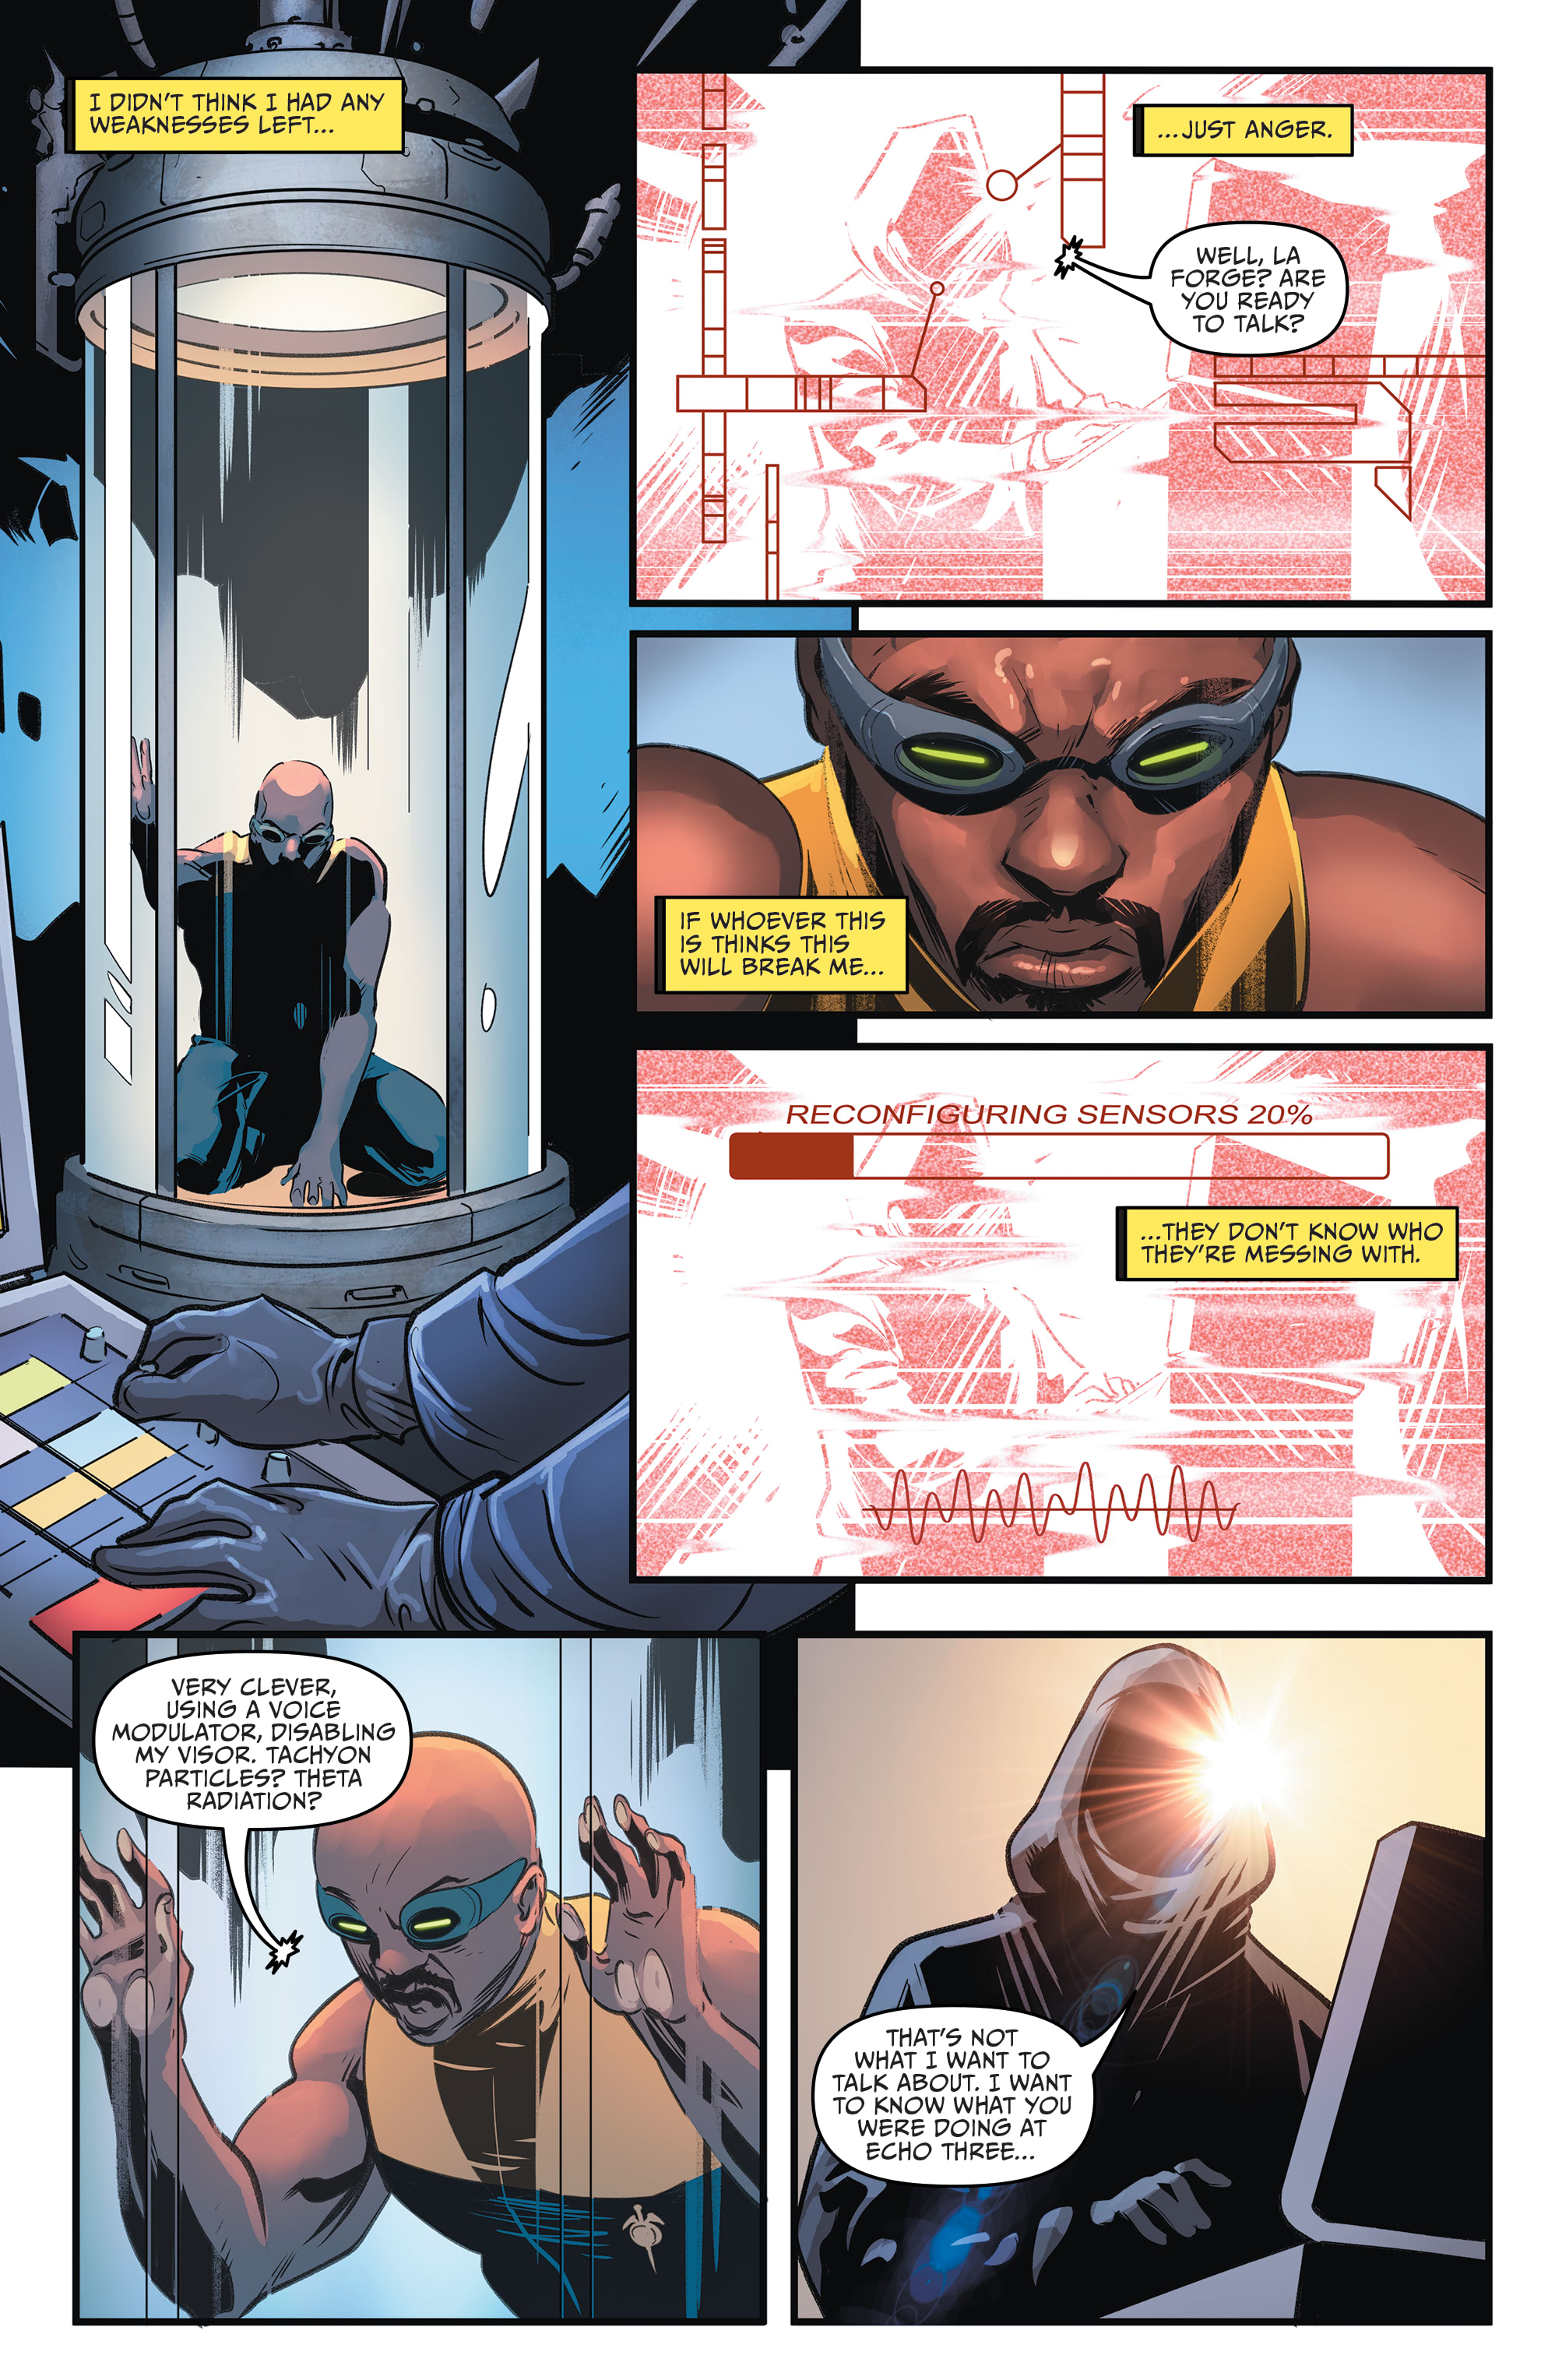 Star Trek: The Mirror War - Captain LaForge (2022-): Chapter 1 - Page 4